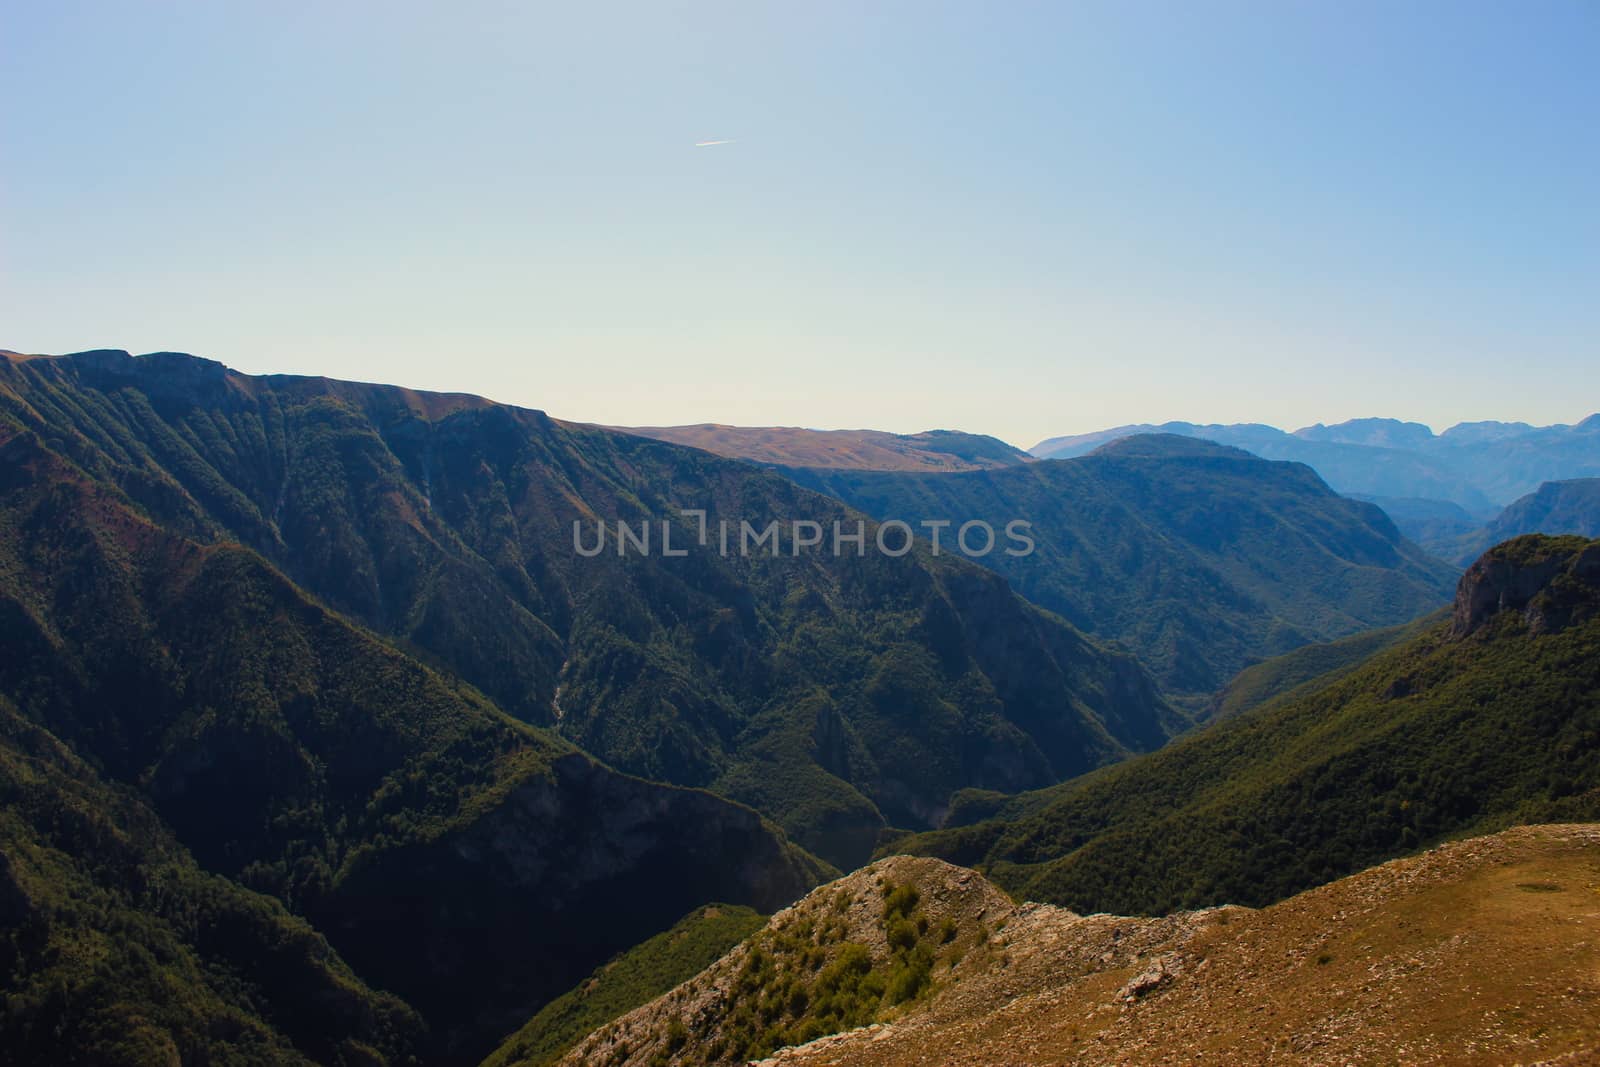 The mountain top elongates and disappears into the background. Mountains of Bosnia and Herzegovina. Bjelasnica Mountain, Bosnia and Herzegovina.